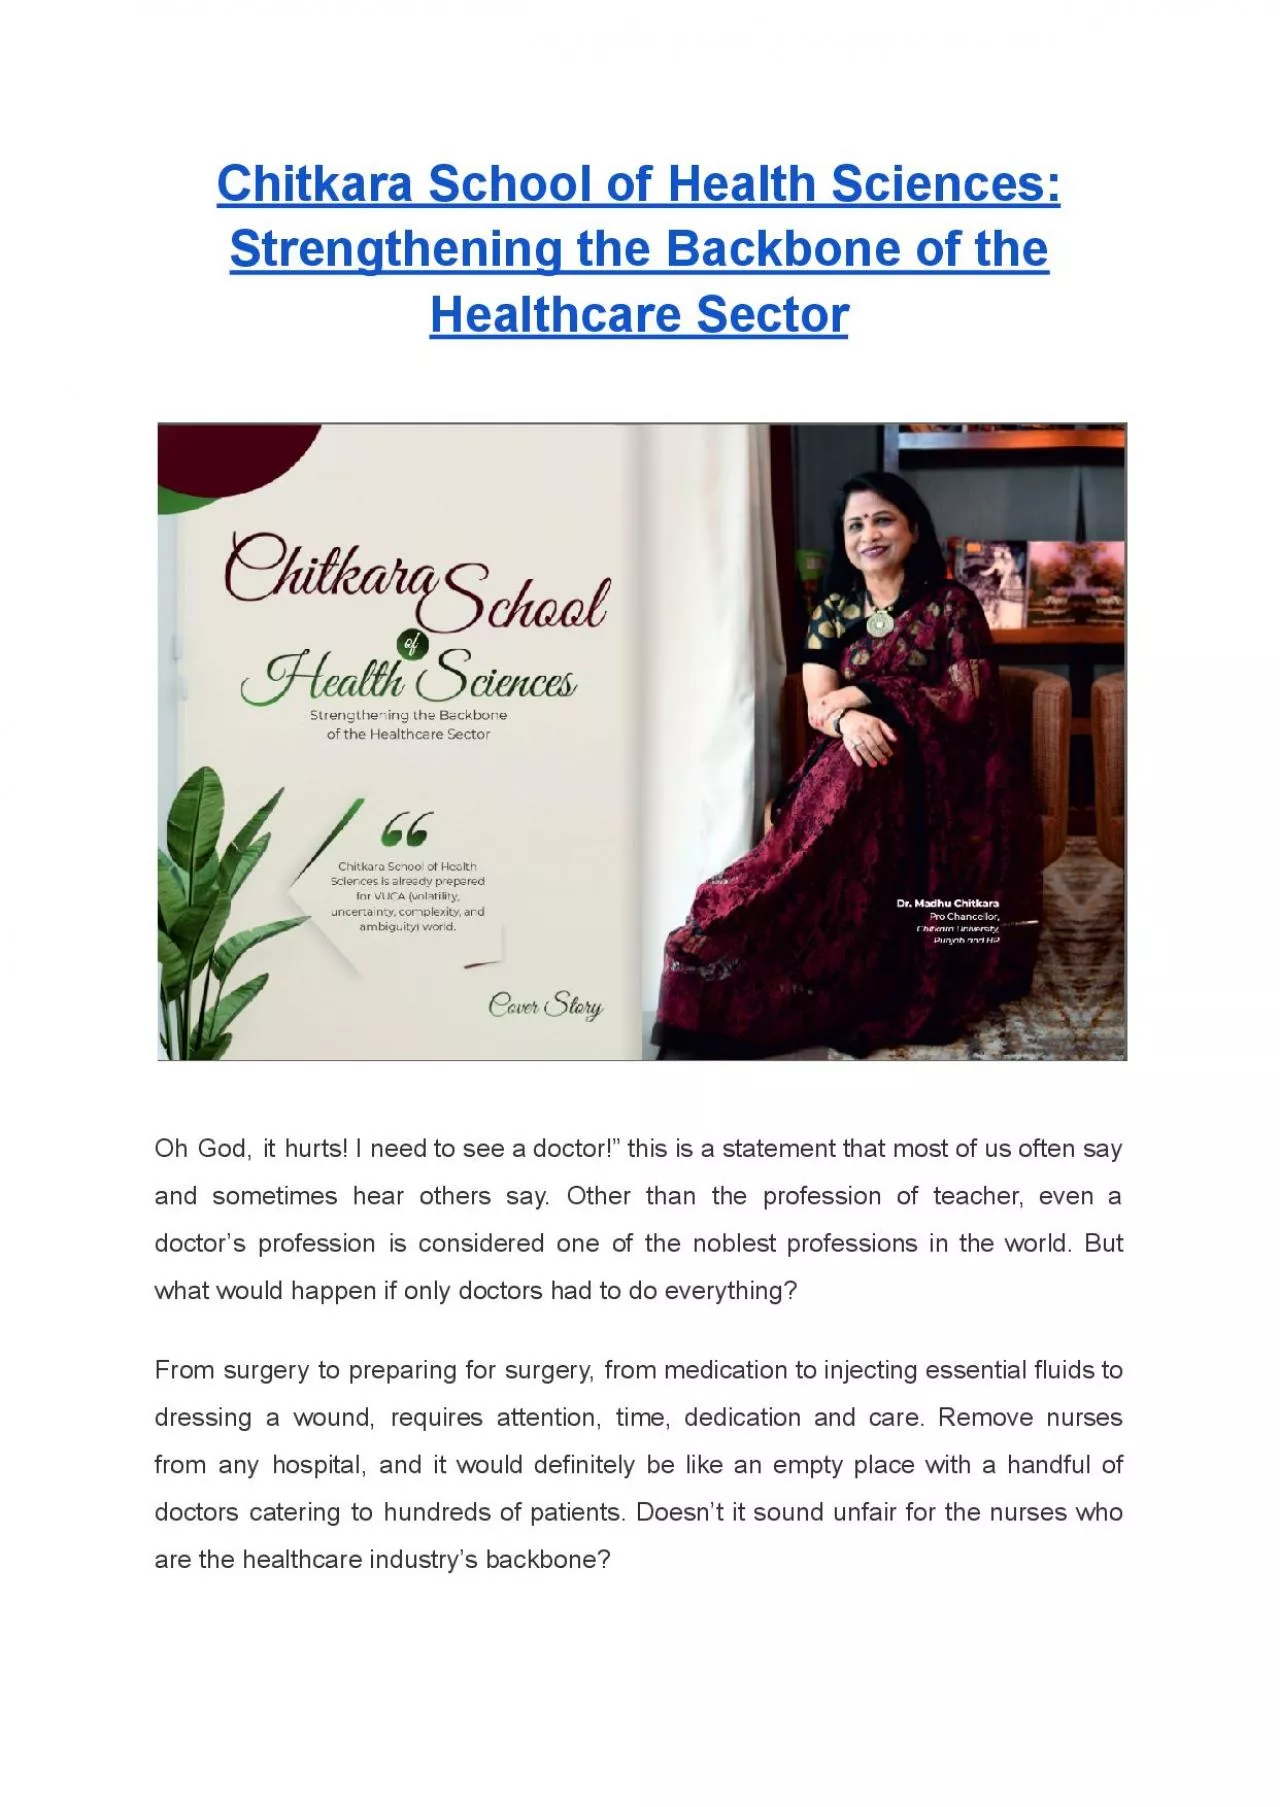 Chitkara School of Health Sciences: Strengthening the Backbone of the Healthcare Sector